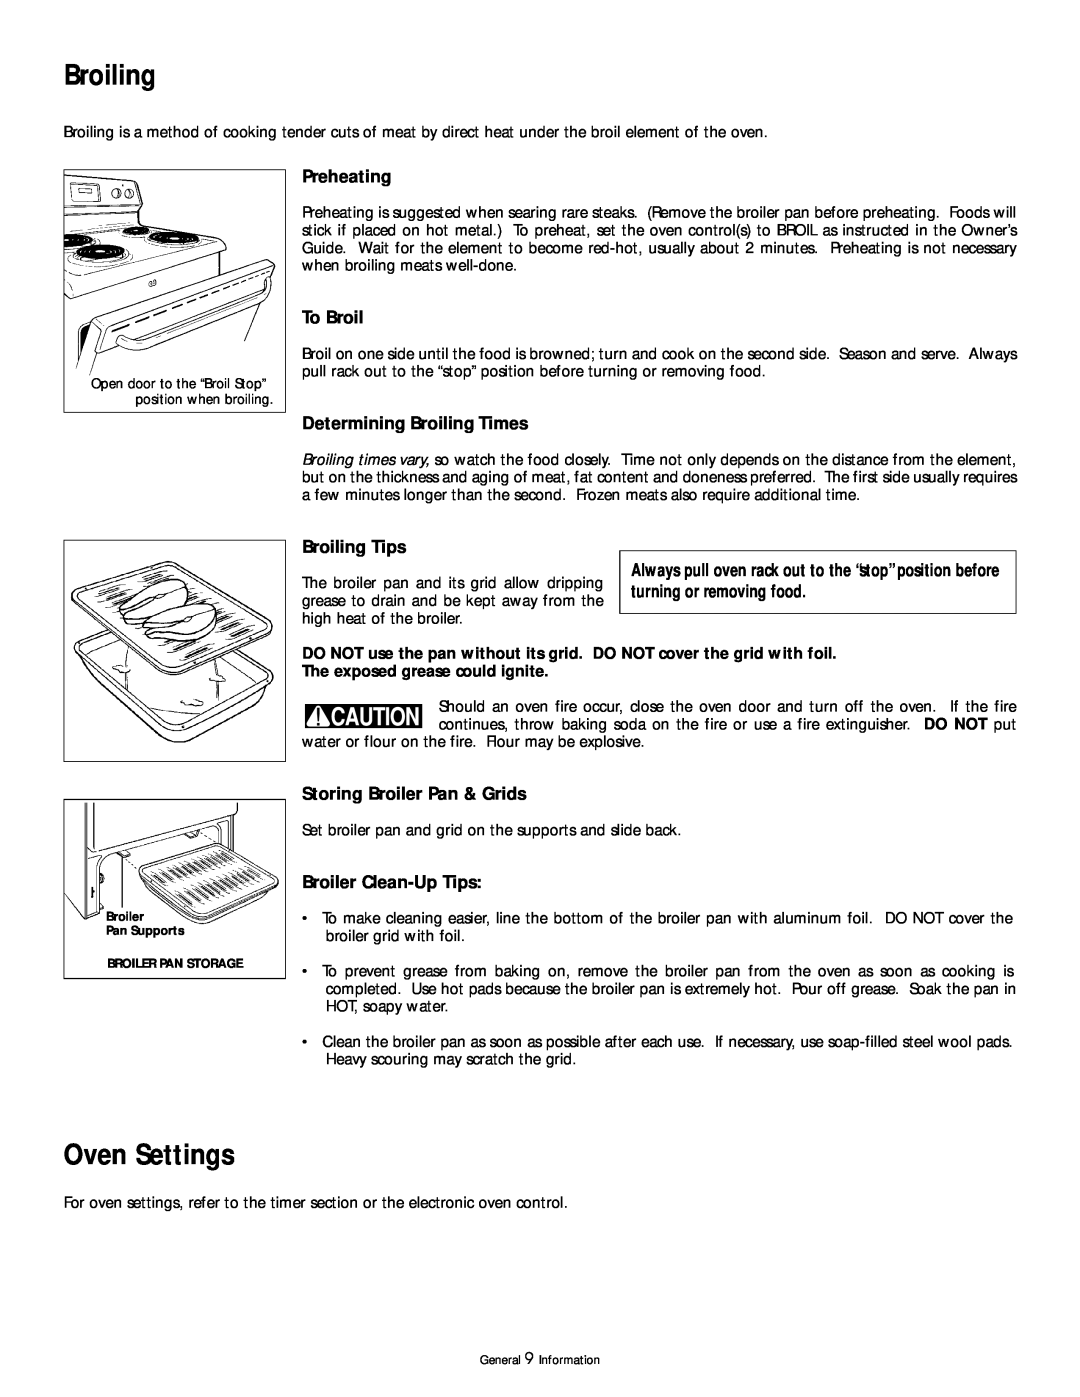 Tappan 318200409 Oven Settings, Preheating, To Broil, Determining Broiling Times, Broiling Tips, Broiler Clean-Up Tips 